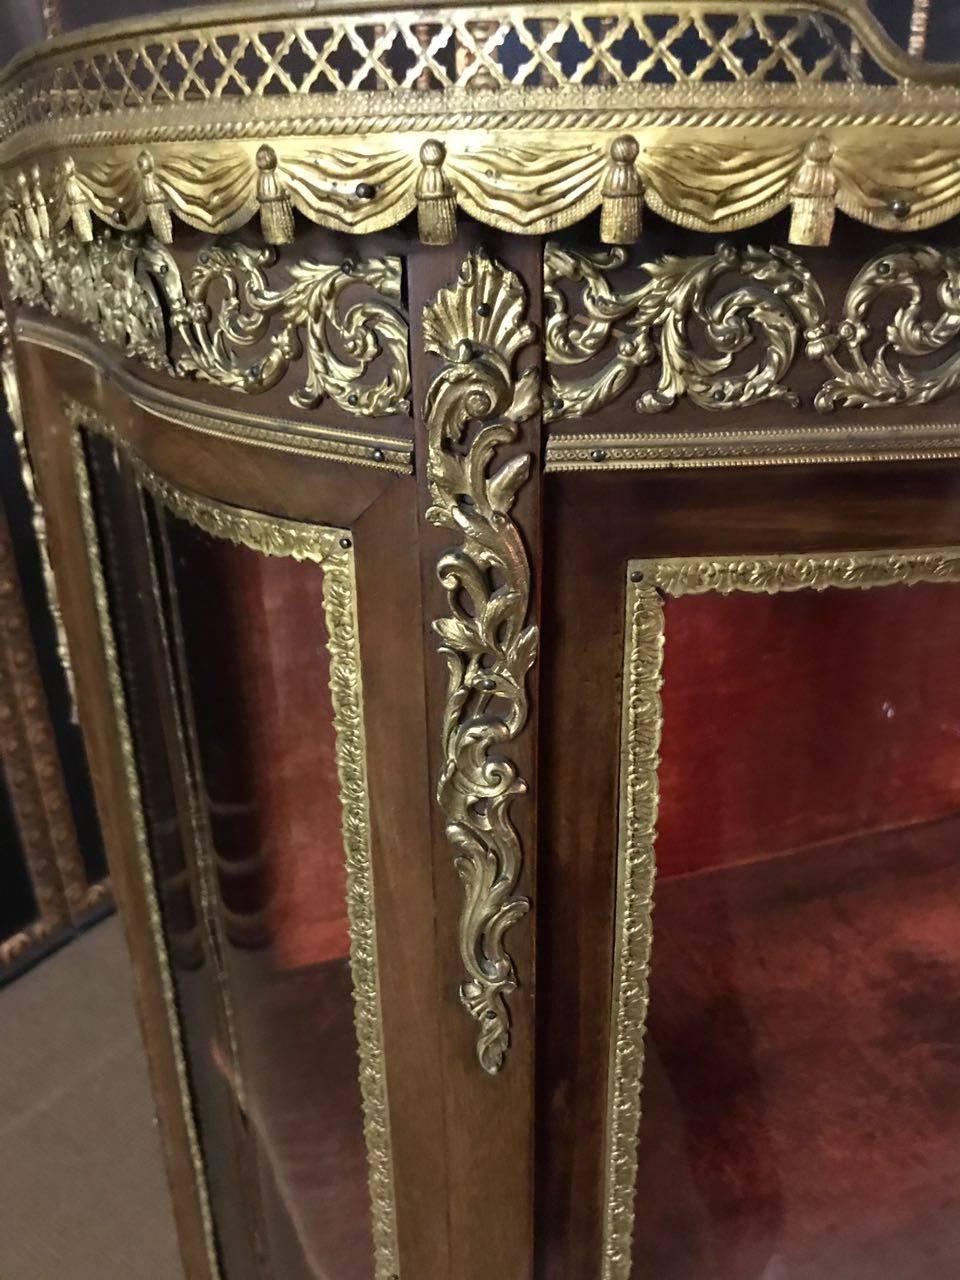 Mahogany  on solid wood. High-aisle, one-door, curved and three-sided glazed body. On its curled feet, a draped frame.
Three-sided glazed display case. Slightly protruding top plate with brass gallery. Rich bronze fittings. Backboard covered with